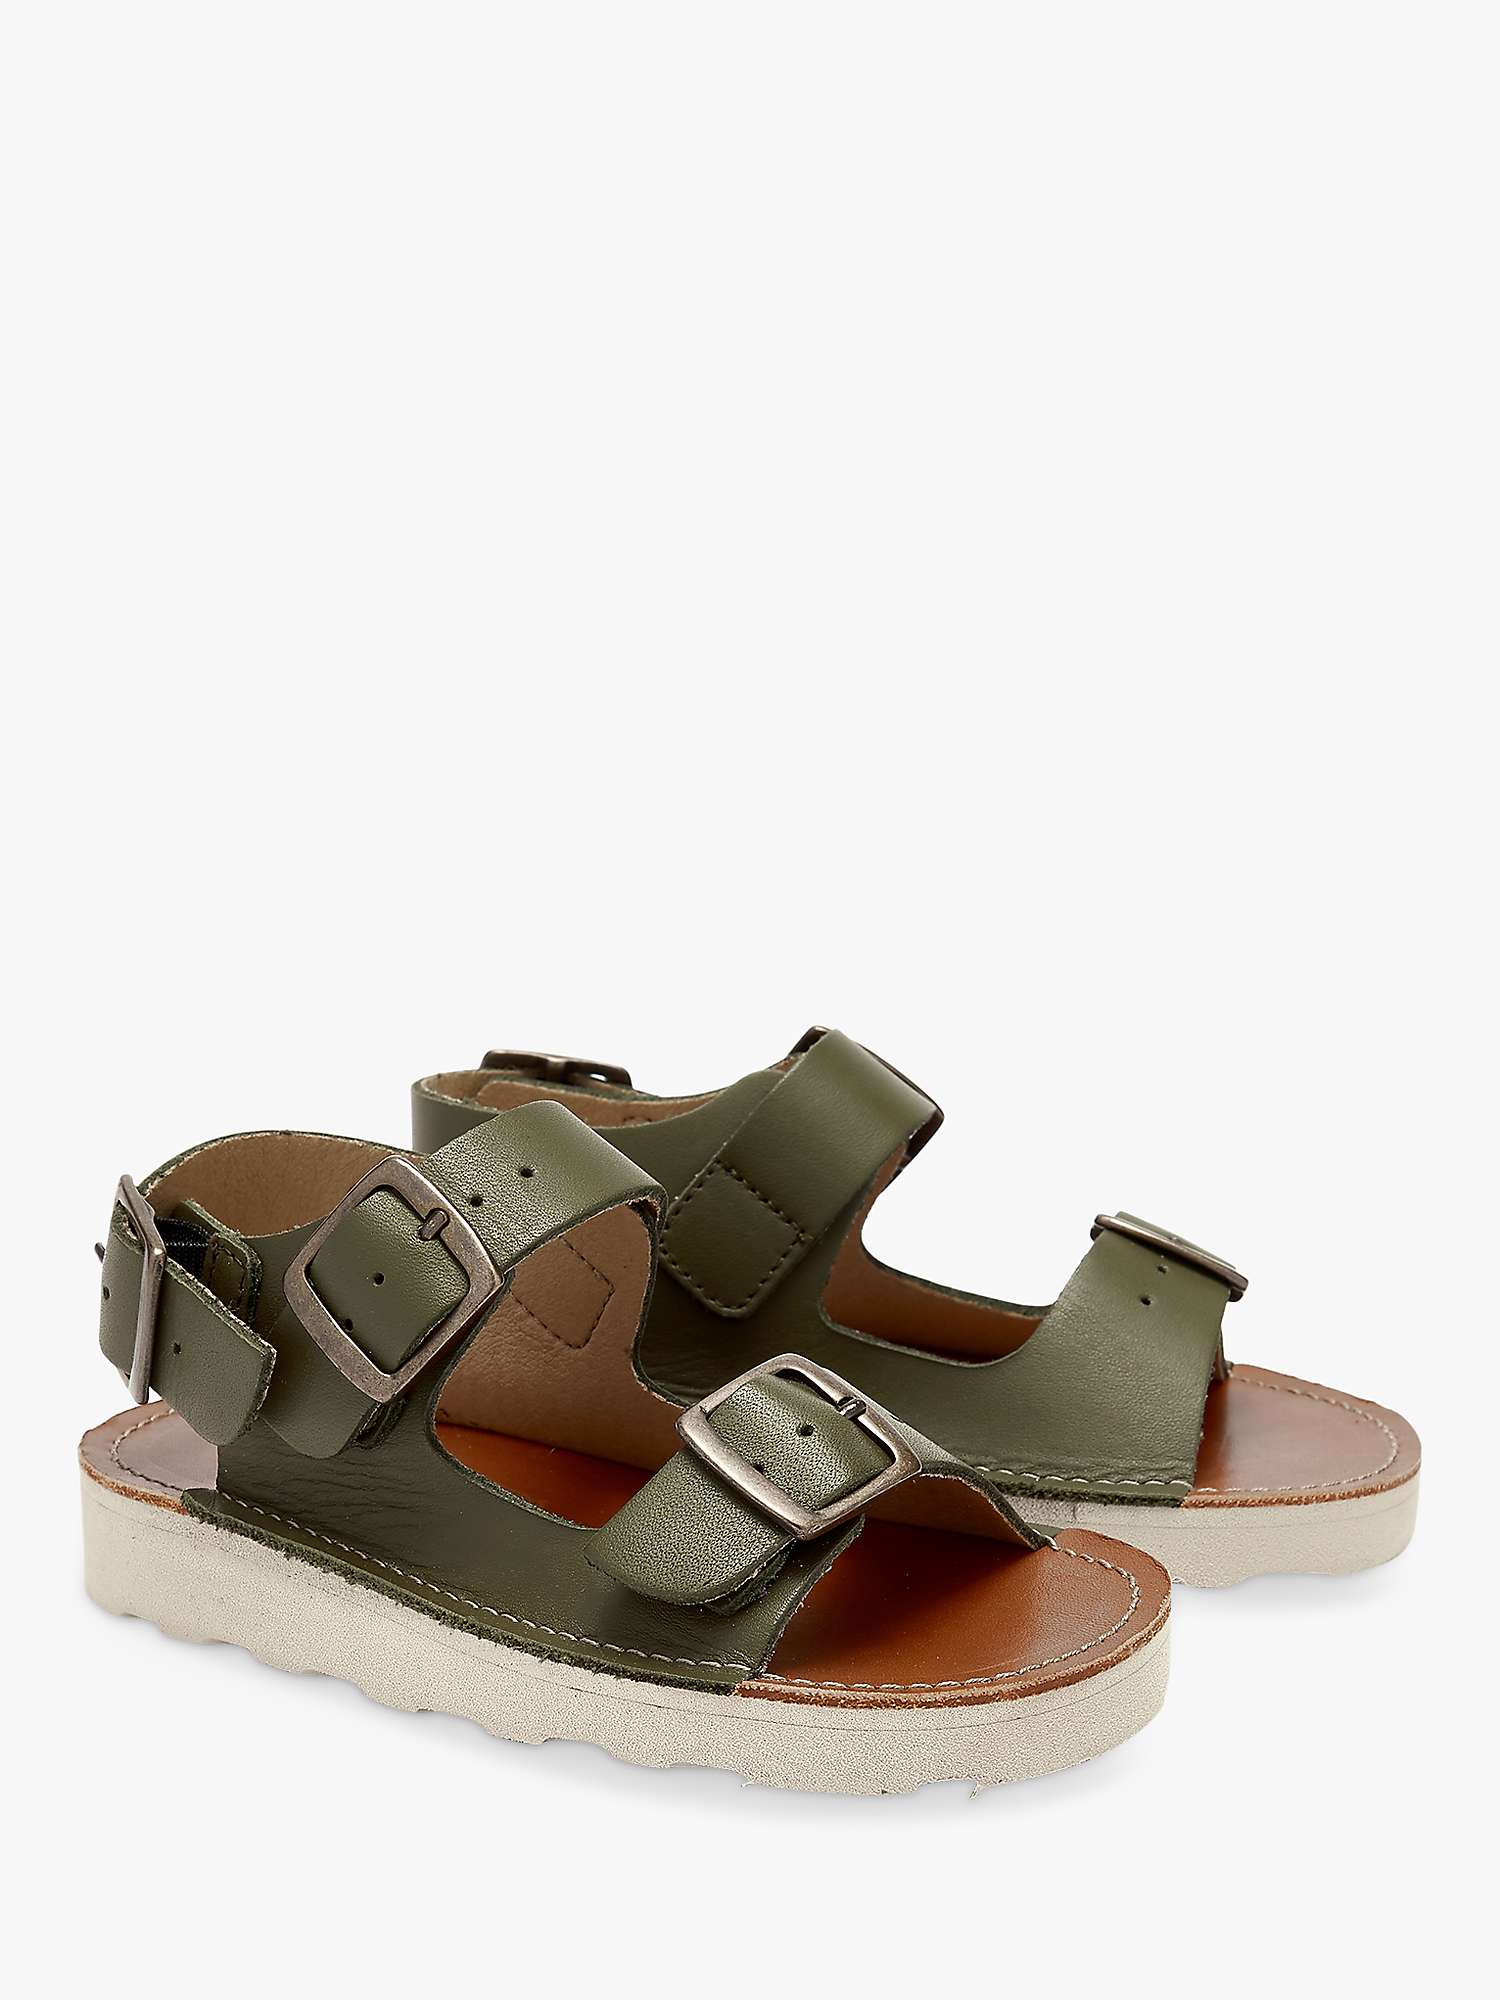 Buy Young Soles Kids' Spike Leather Sandals Online at johnlewis.com